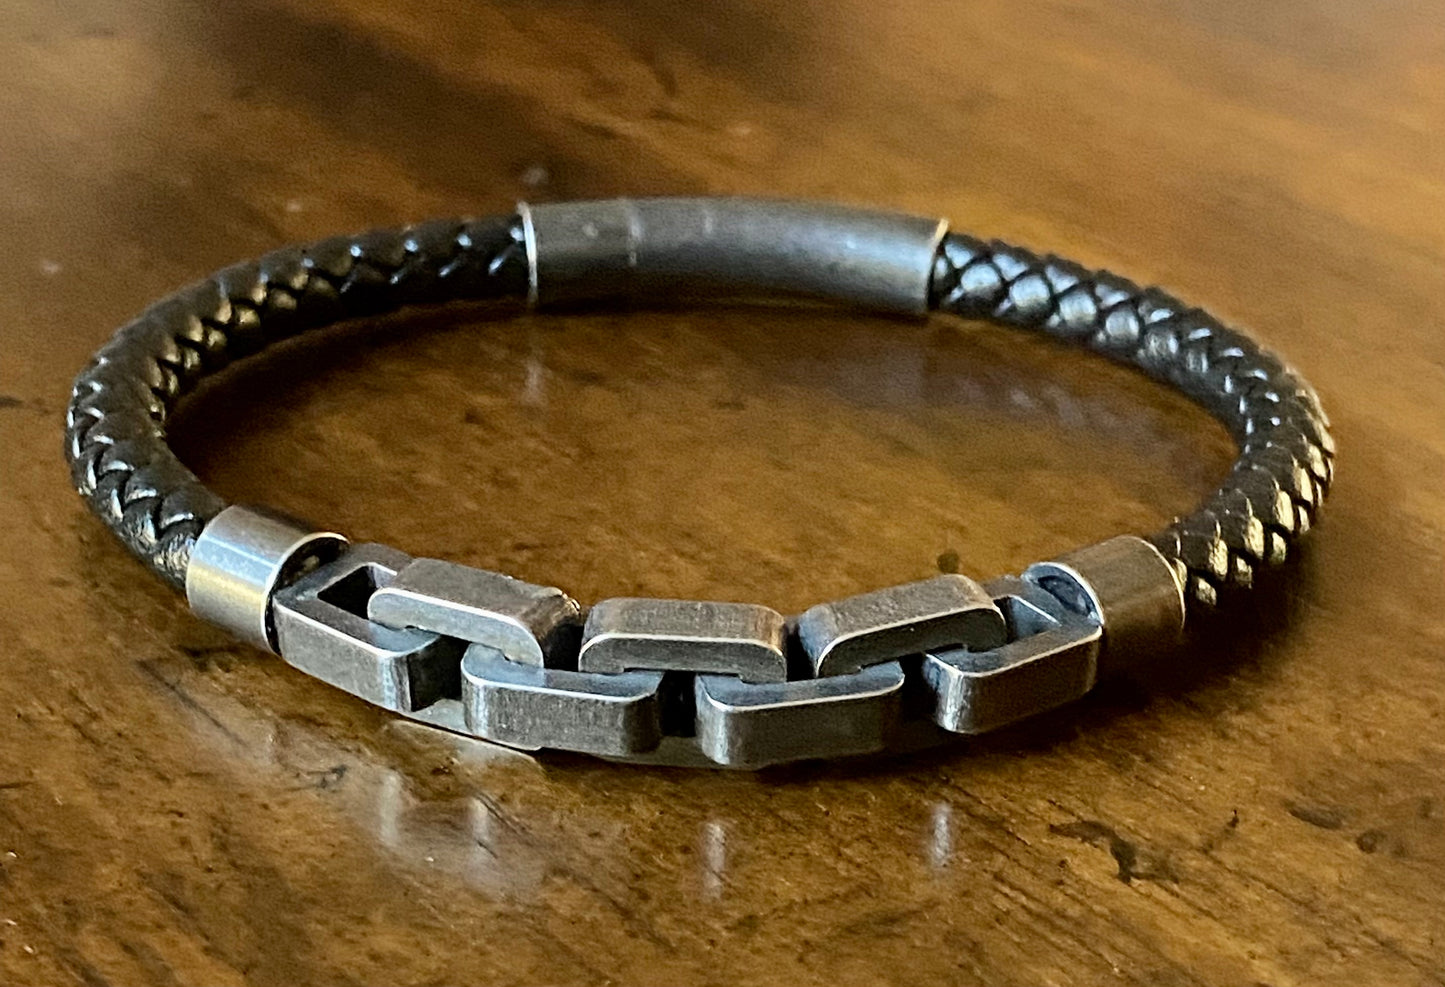 Men's Nappa Leather Bracelet with Stainless Steel Chain Link Accent